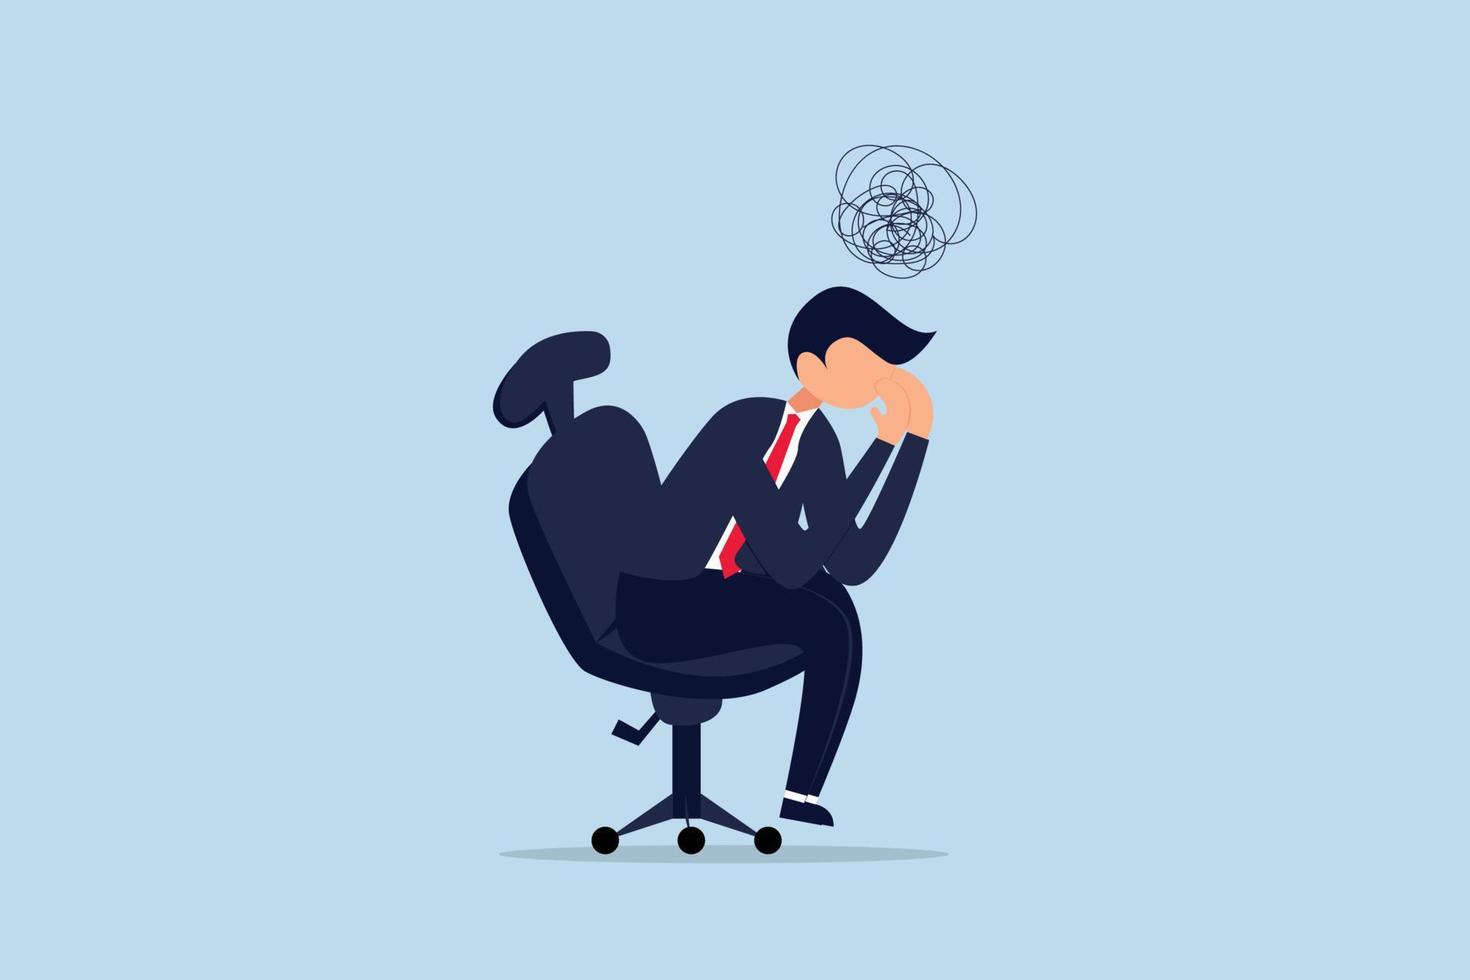 Regret on business mistake, frustration or depressed, frustrated businessman holding his head sitting alone on the chair vector